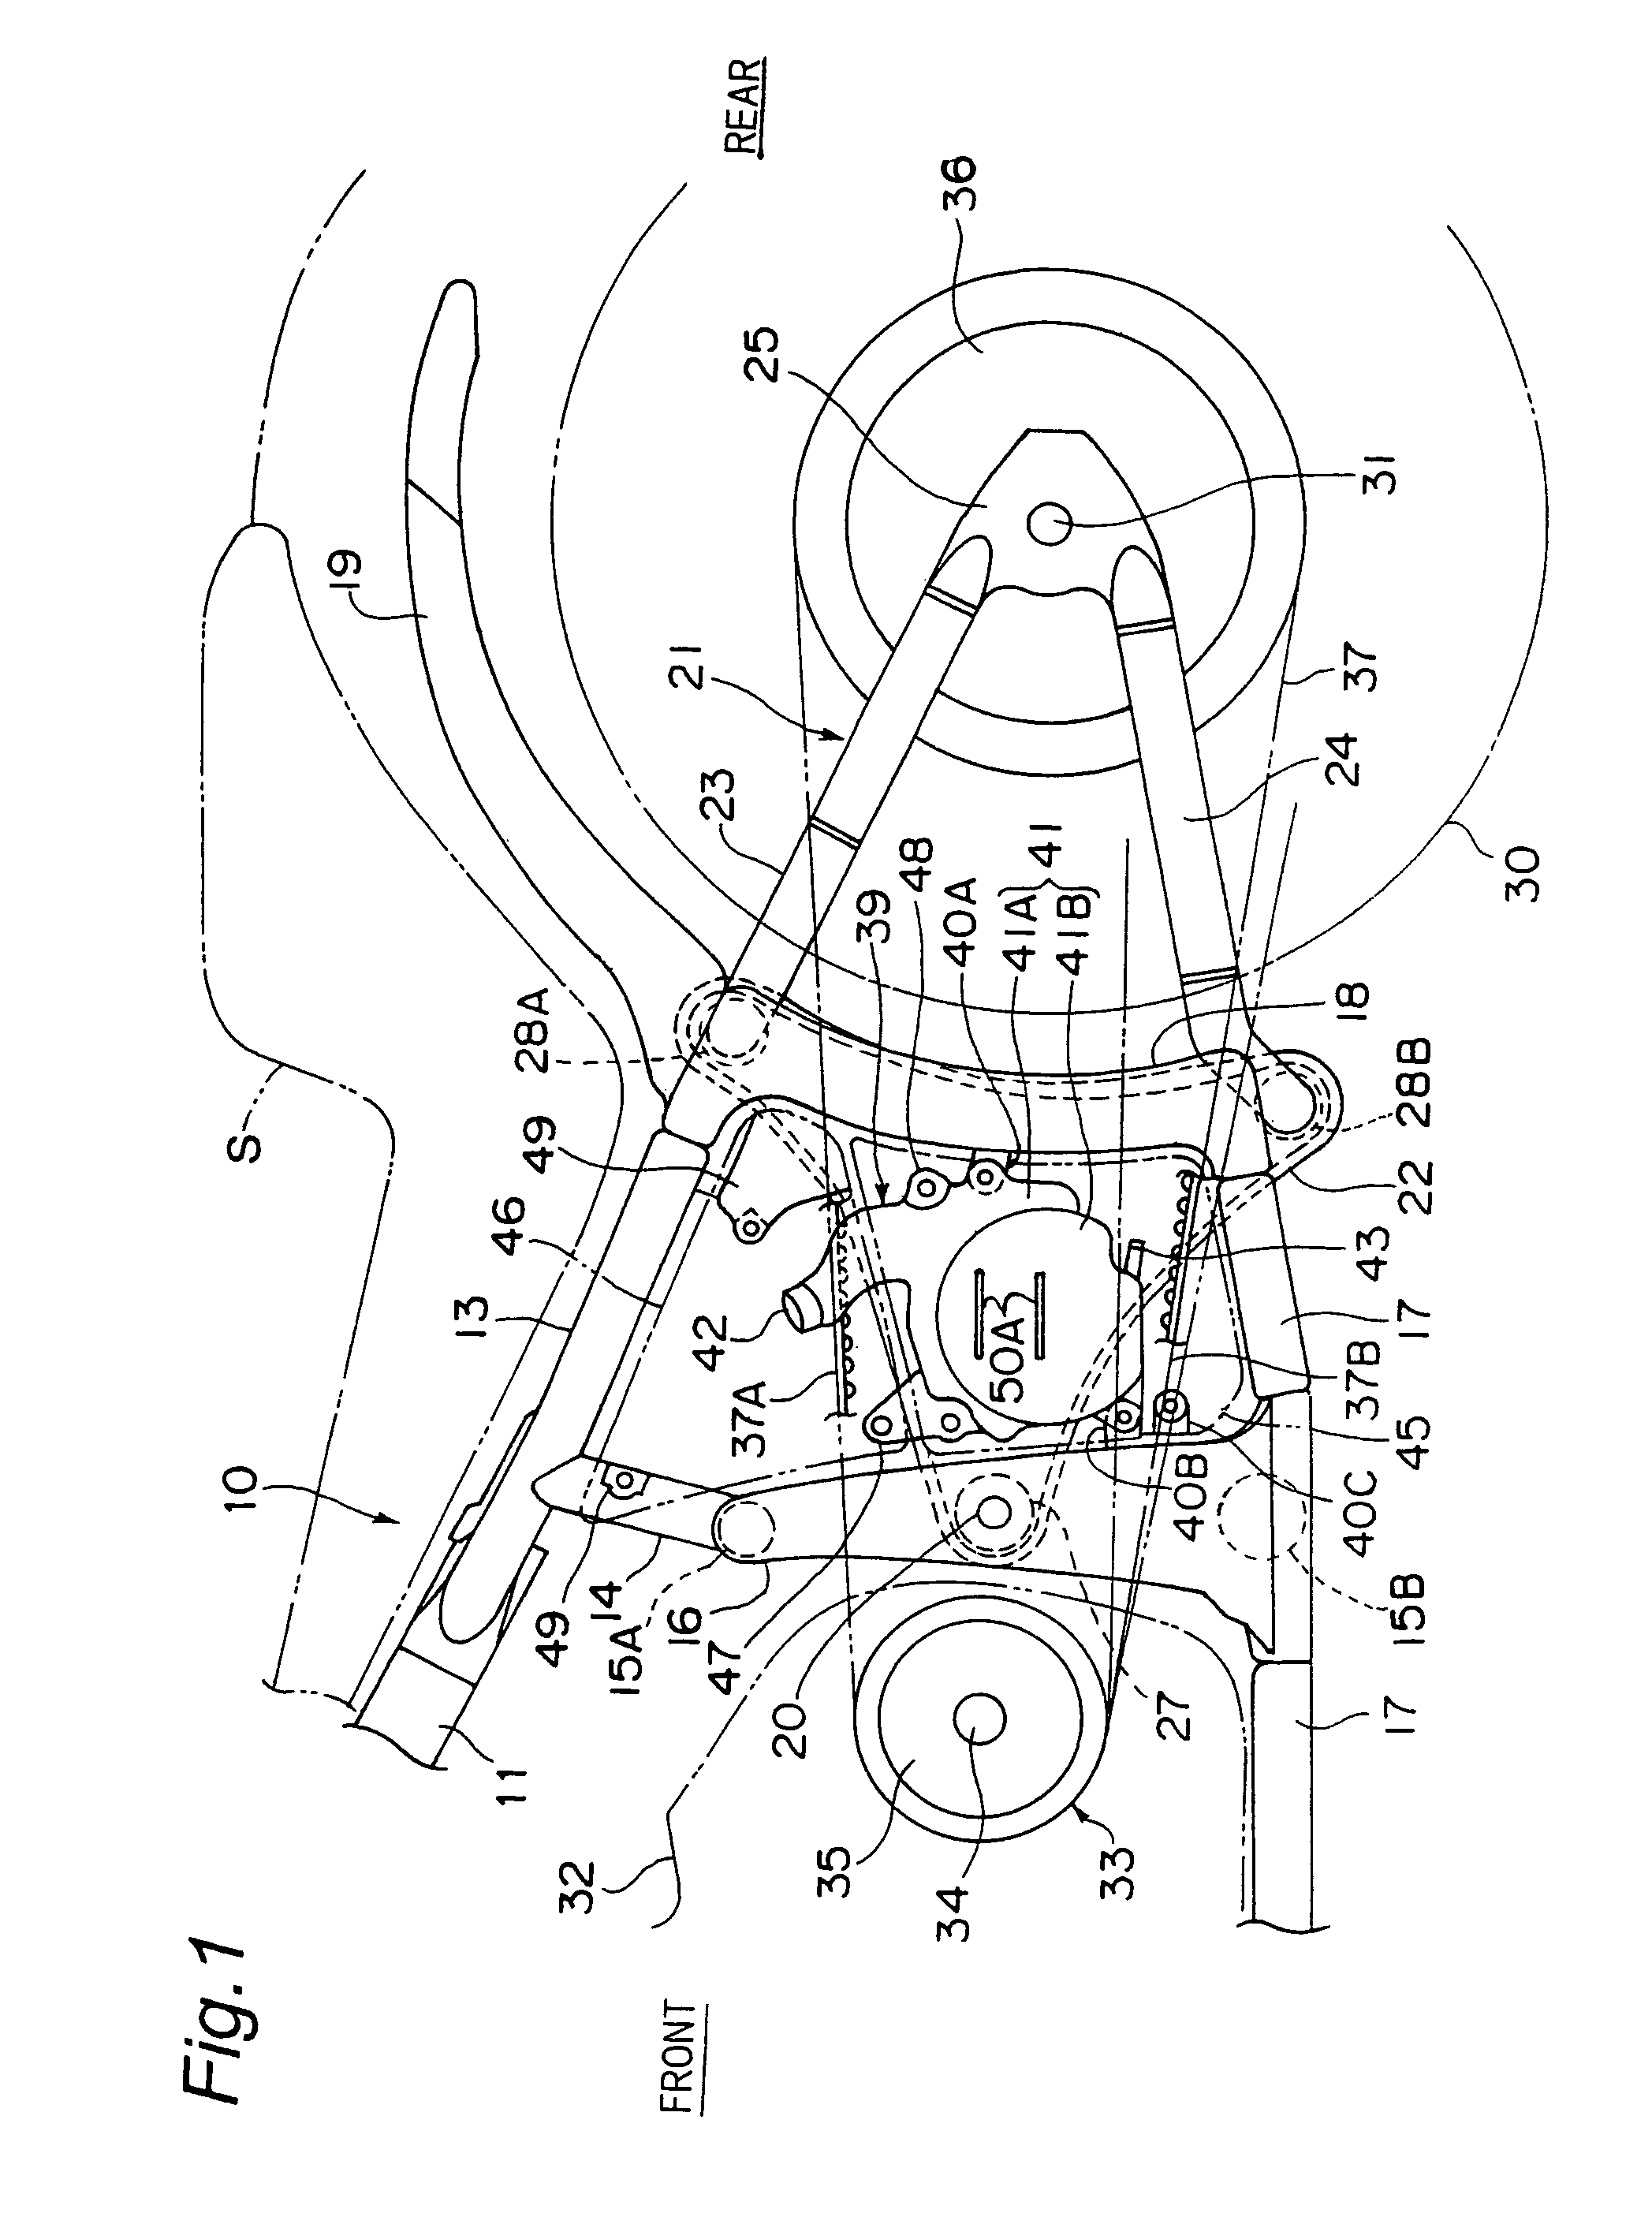 Reserve tank layout structure of motorcycle